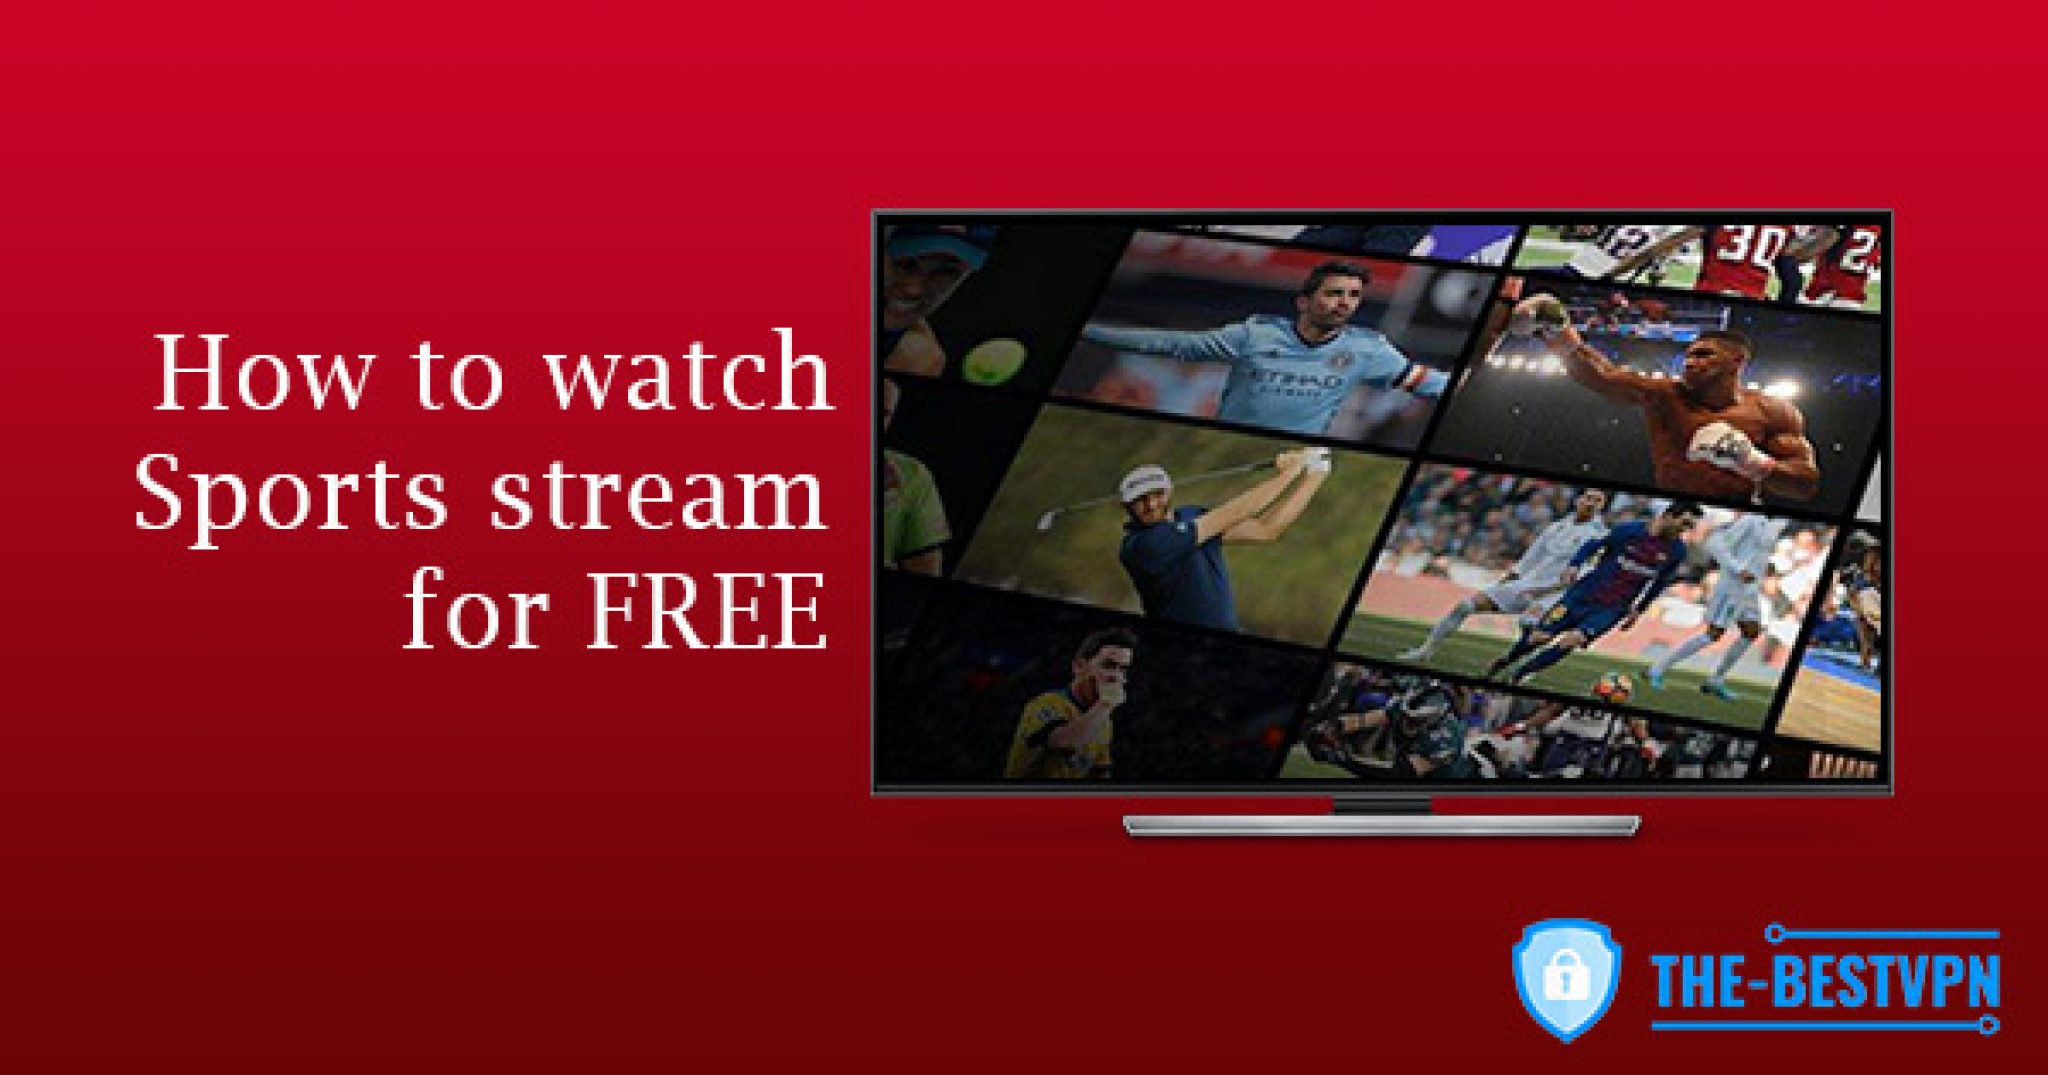 How to Watch Sports Streaming Online? It's Easy if You Use a VPN!